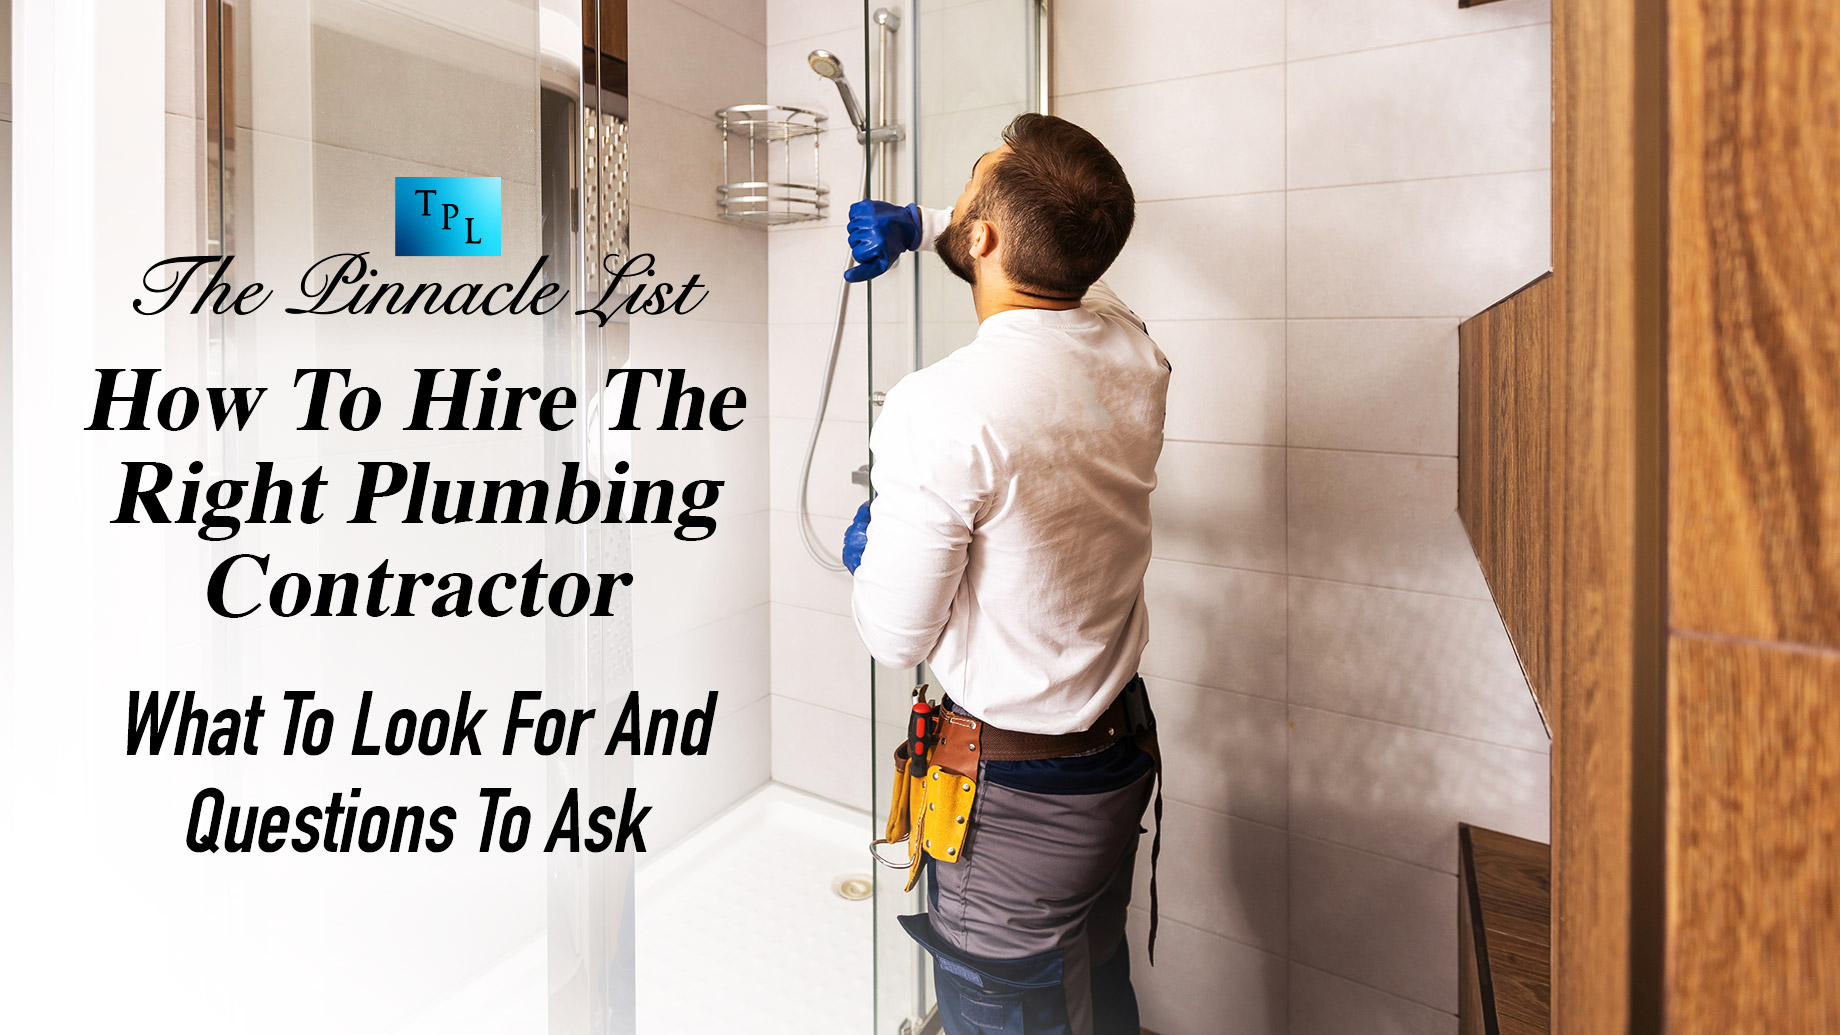 How To Hire The Right Plumbing Contractor: What To Look For And Questions To Ask